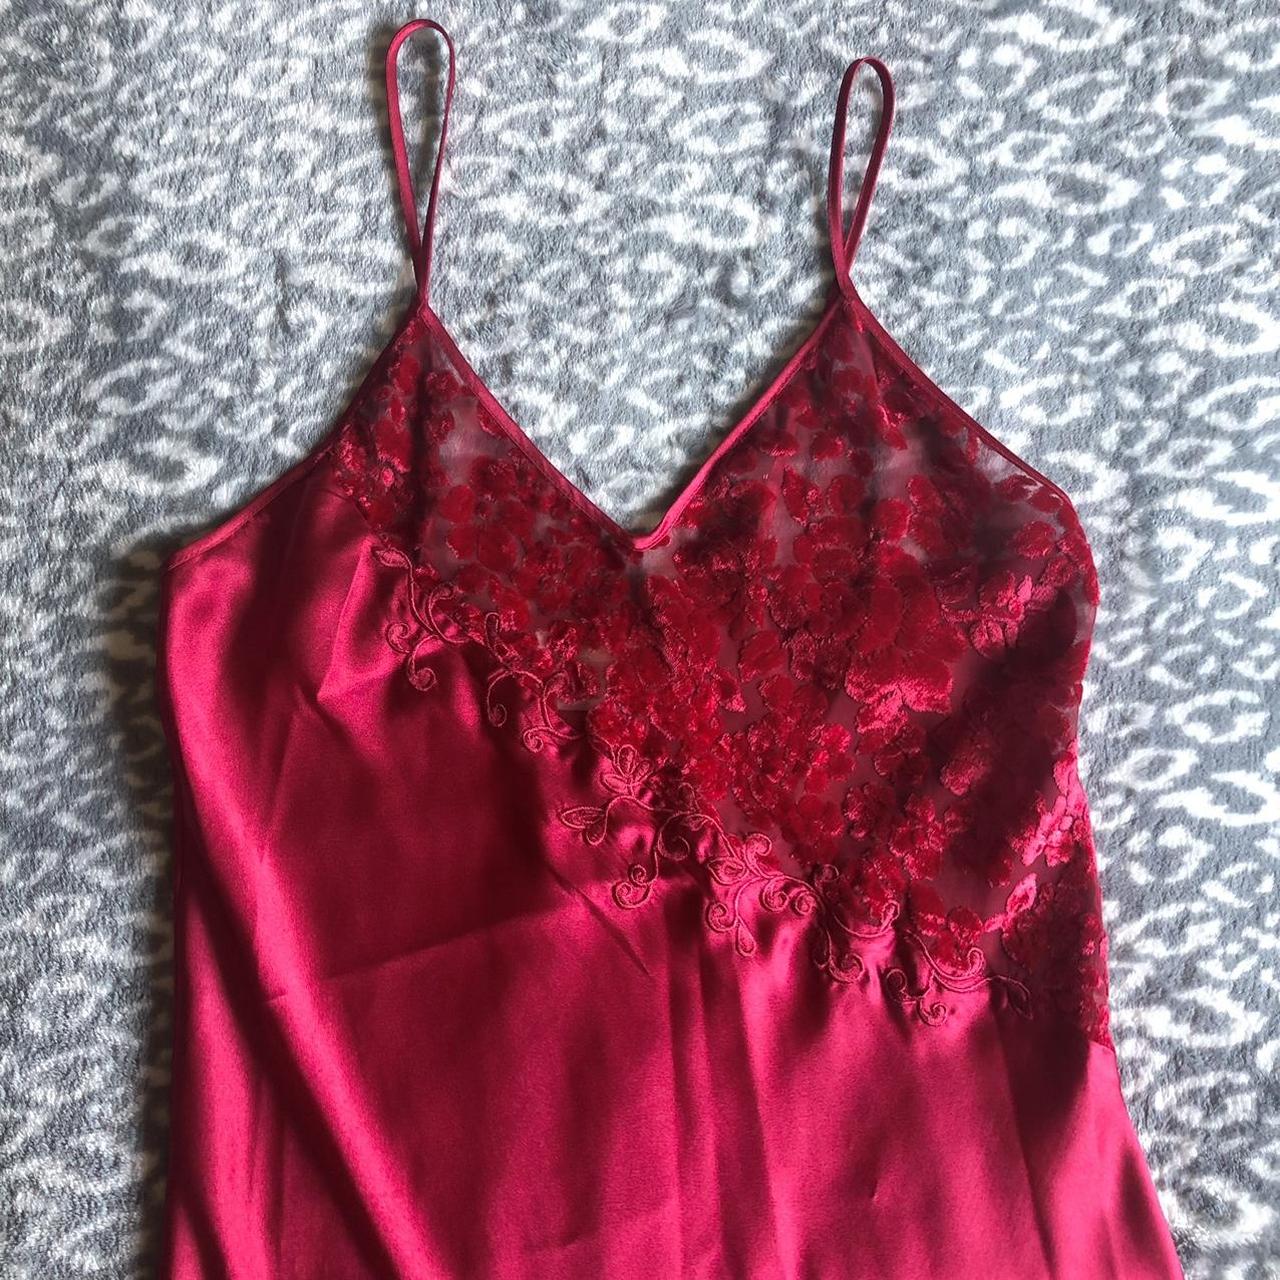 Red lingerie dress with sheer floral bodice 🌹 Maxi... - Depop